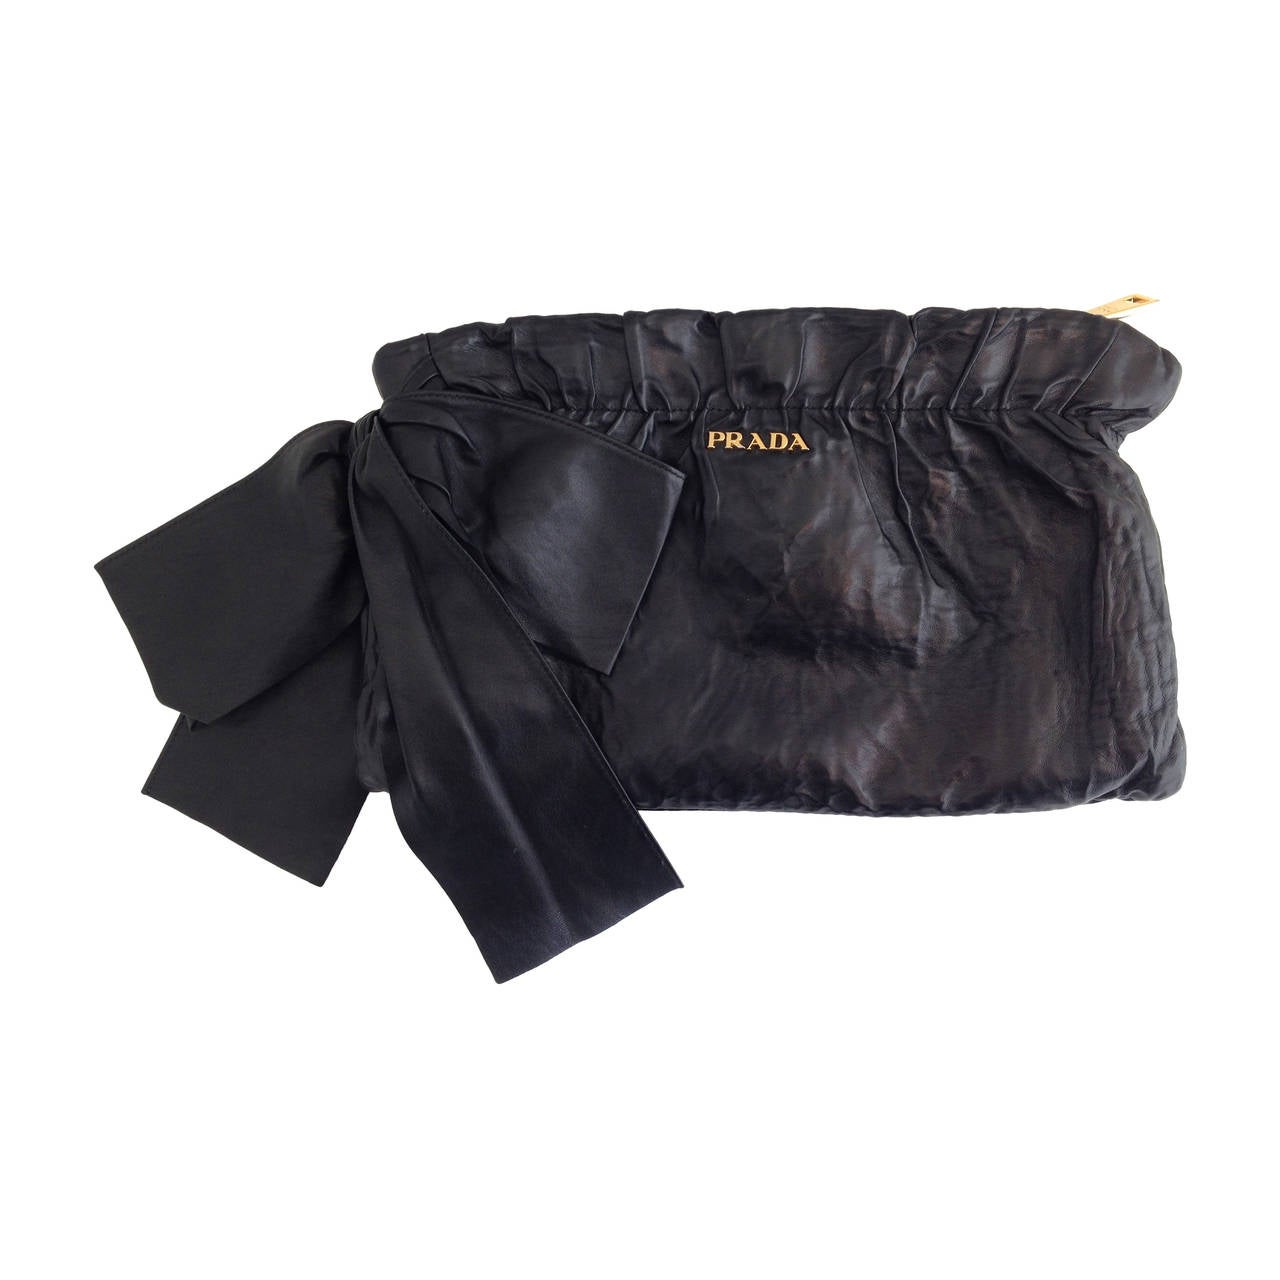 Prada Black Crinkly Leather Clutch with Bow